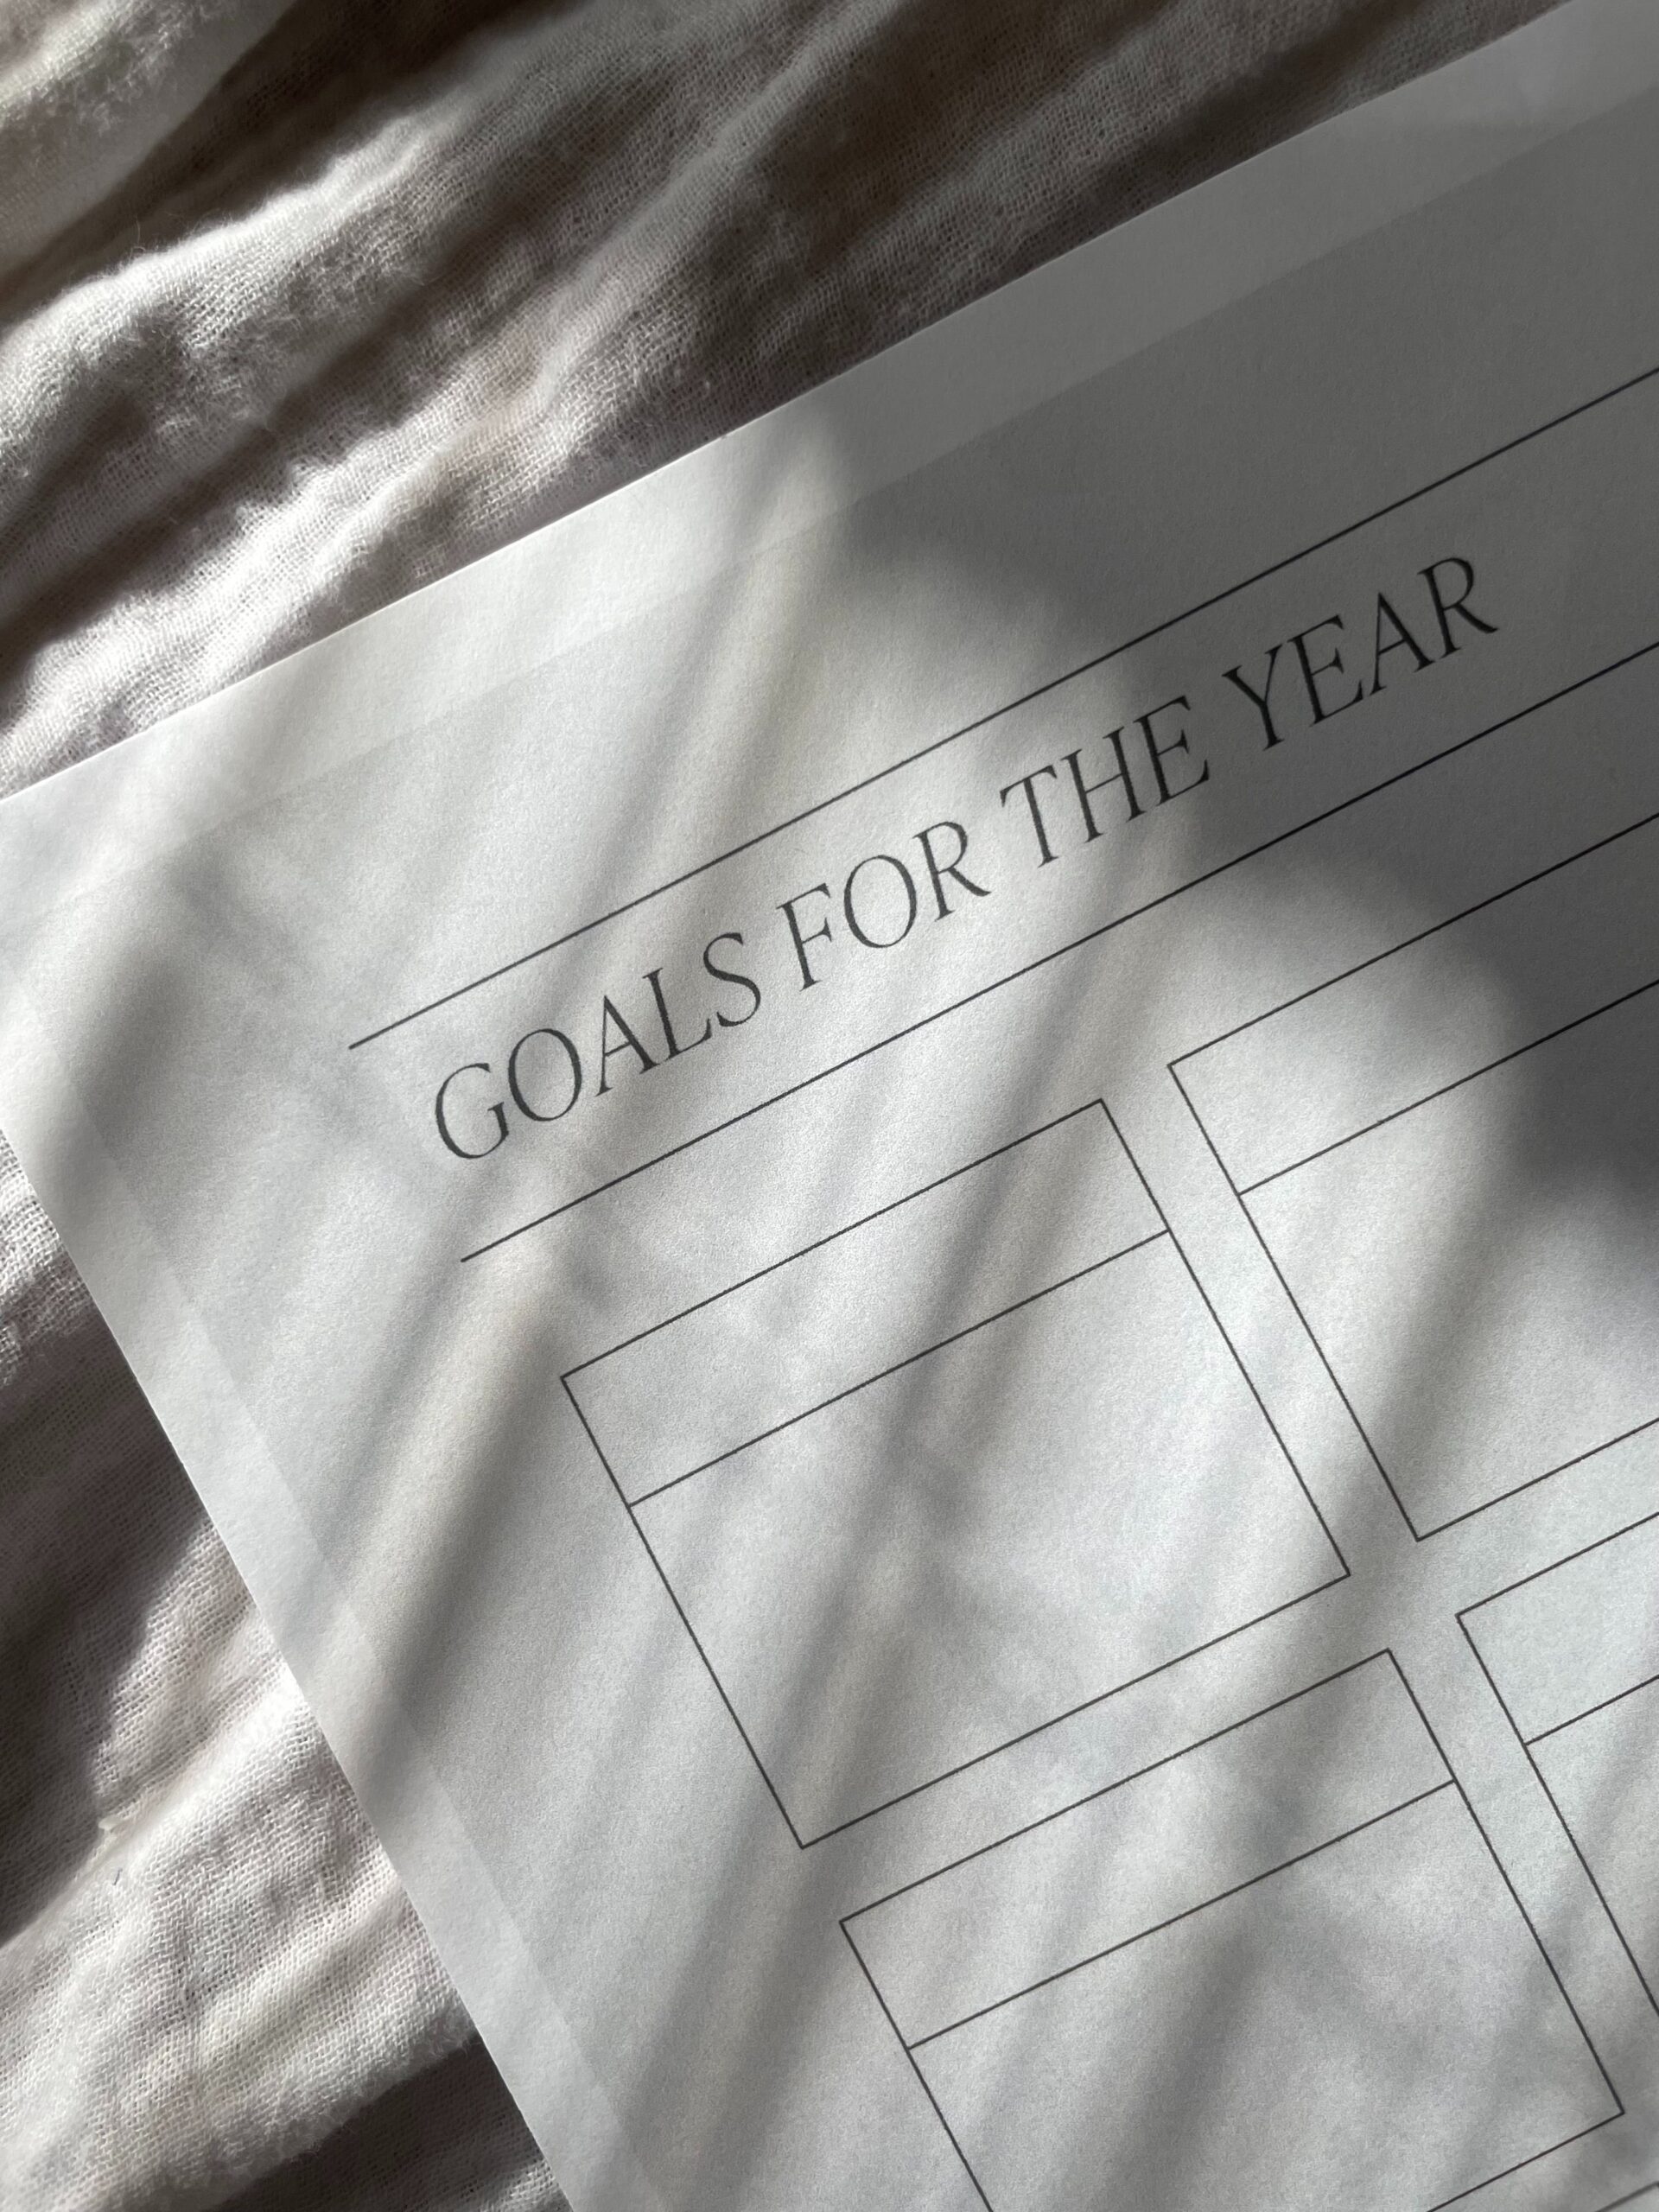 healthy goals for the year